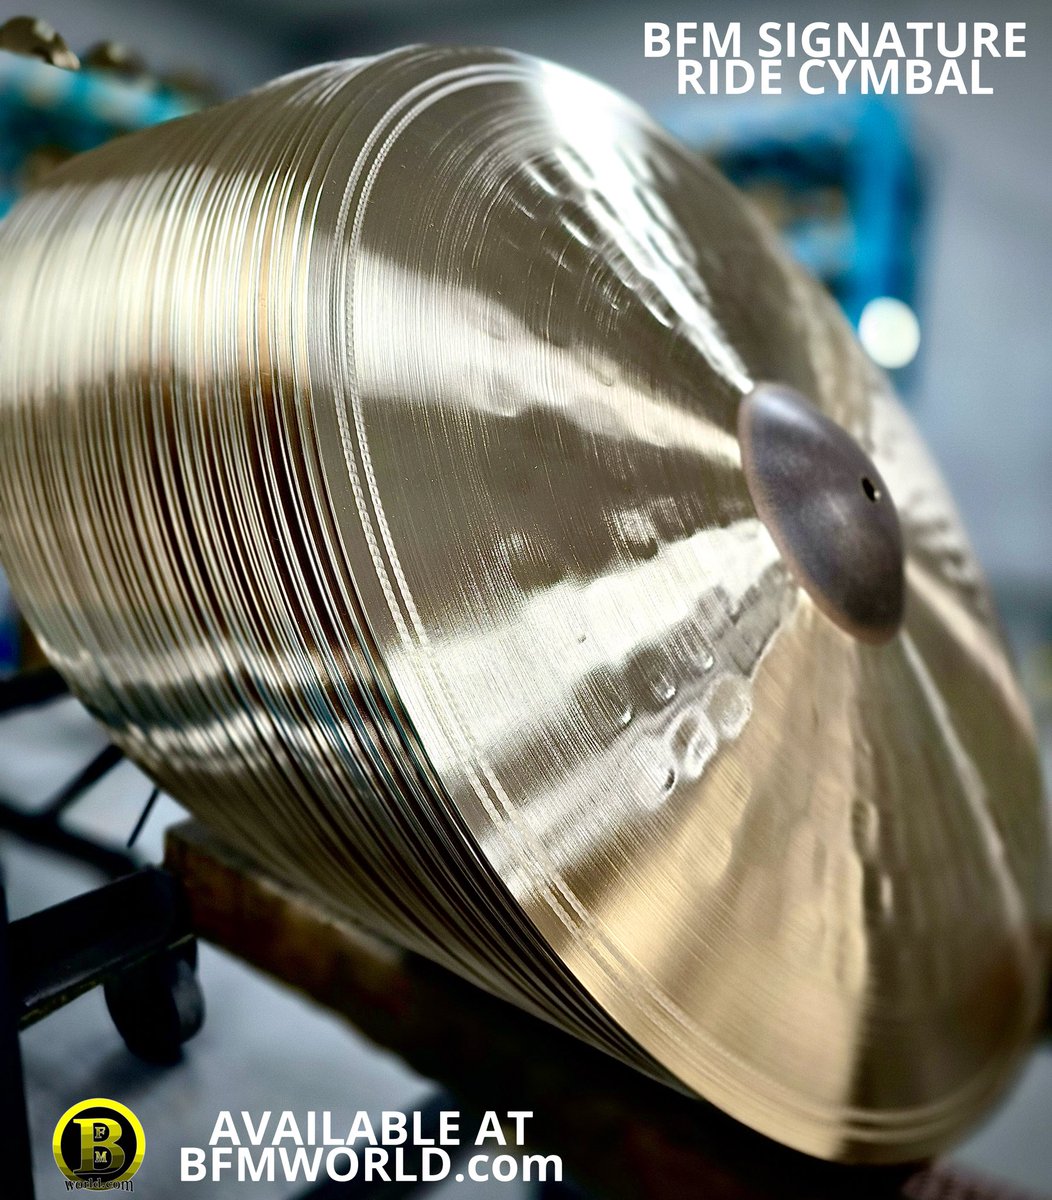 “Hot off the press…”

Introducing the 22” HHX BFMWORLD RIDE by #bfmworld @SABIAN_Cymbals ! A collaboration with the great Brian Frasier-Moore (@BrianFrasierM) AVAILABLE AT BFMWORLD.com, this is a medium weight ride cymbal with a large, clear, cutting bell. Its